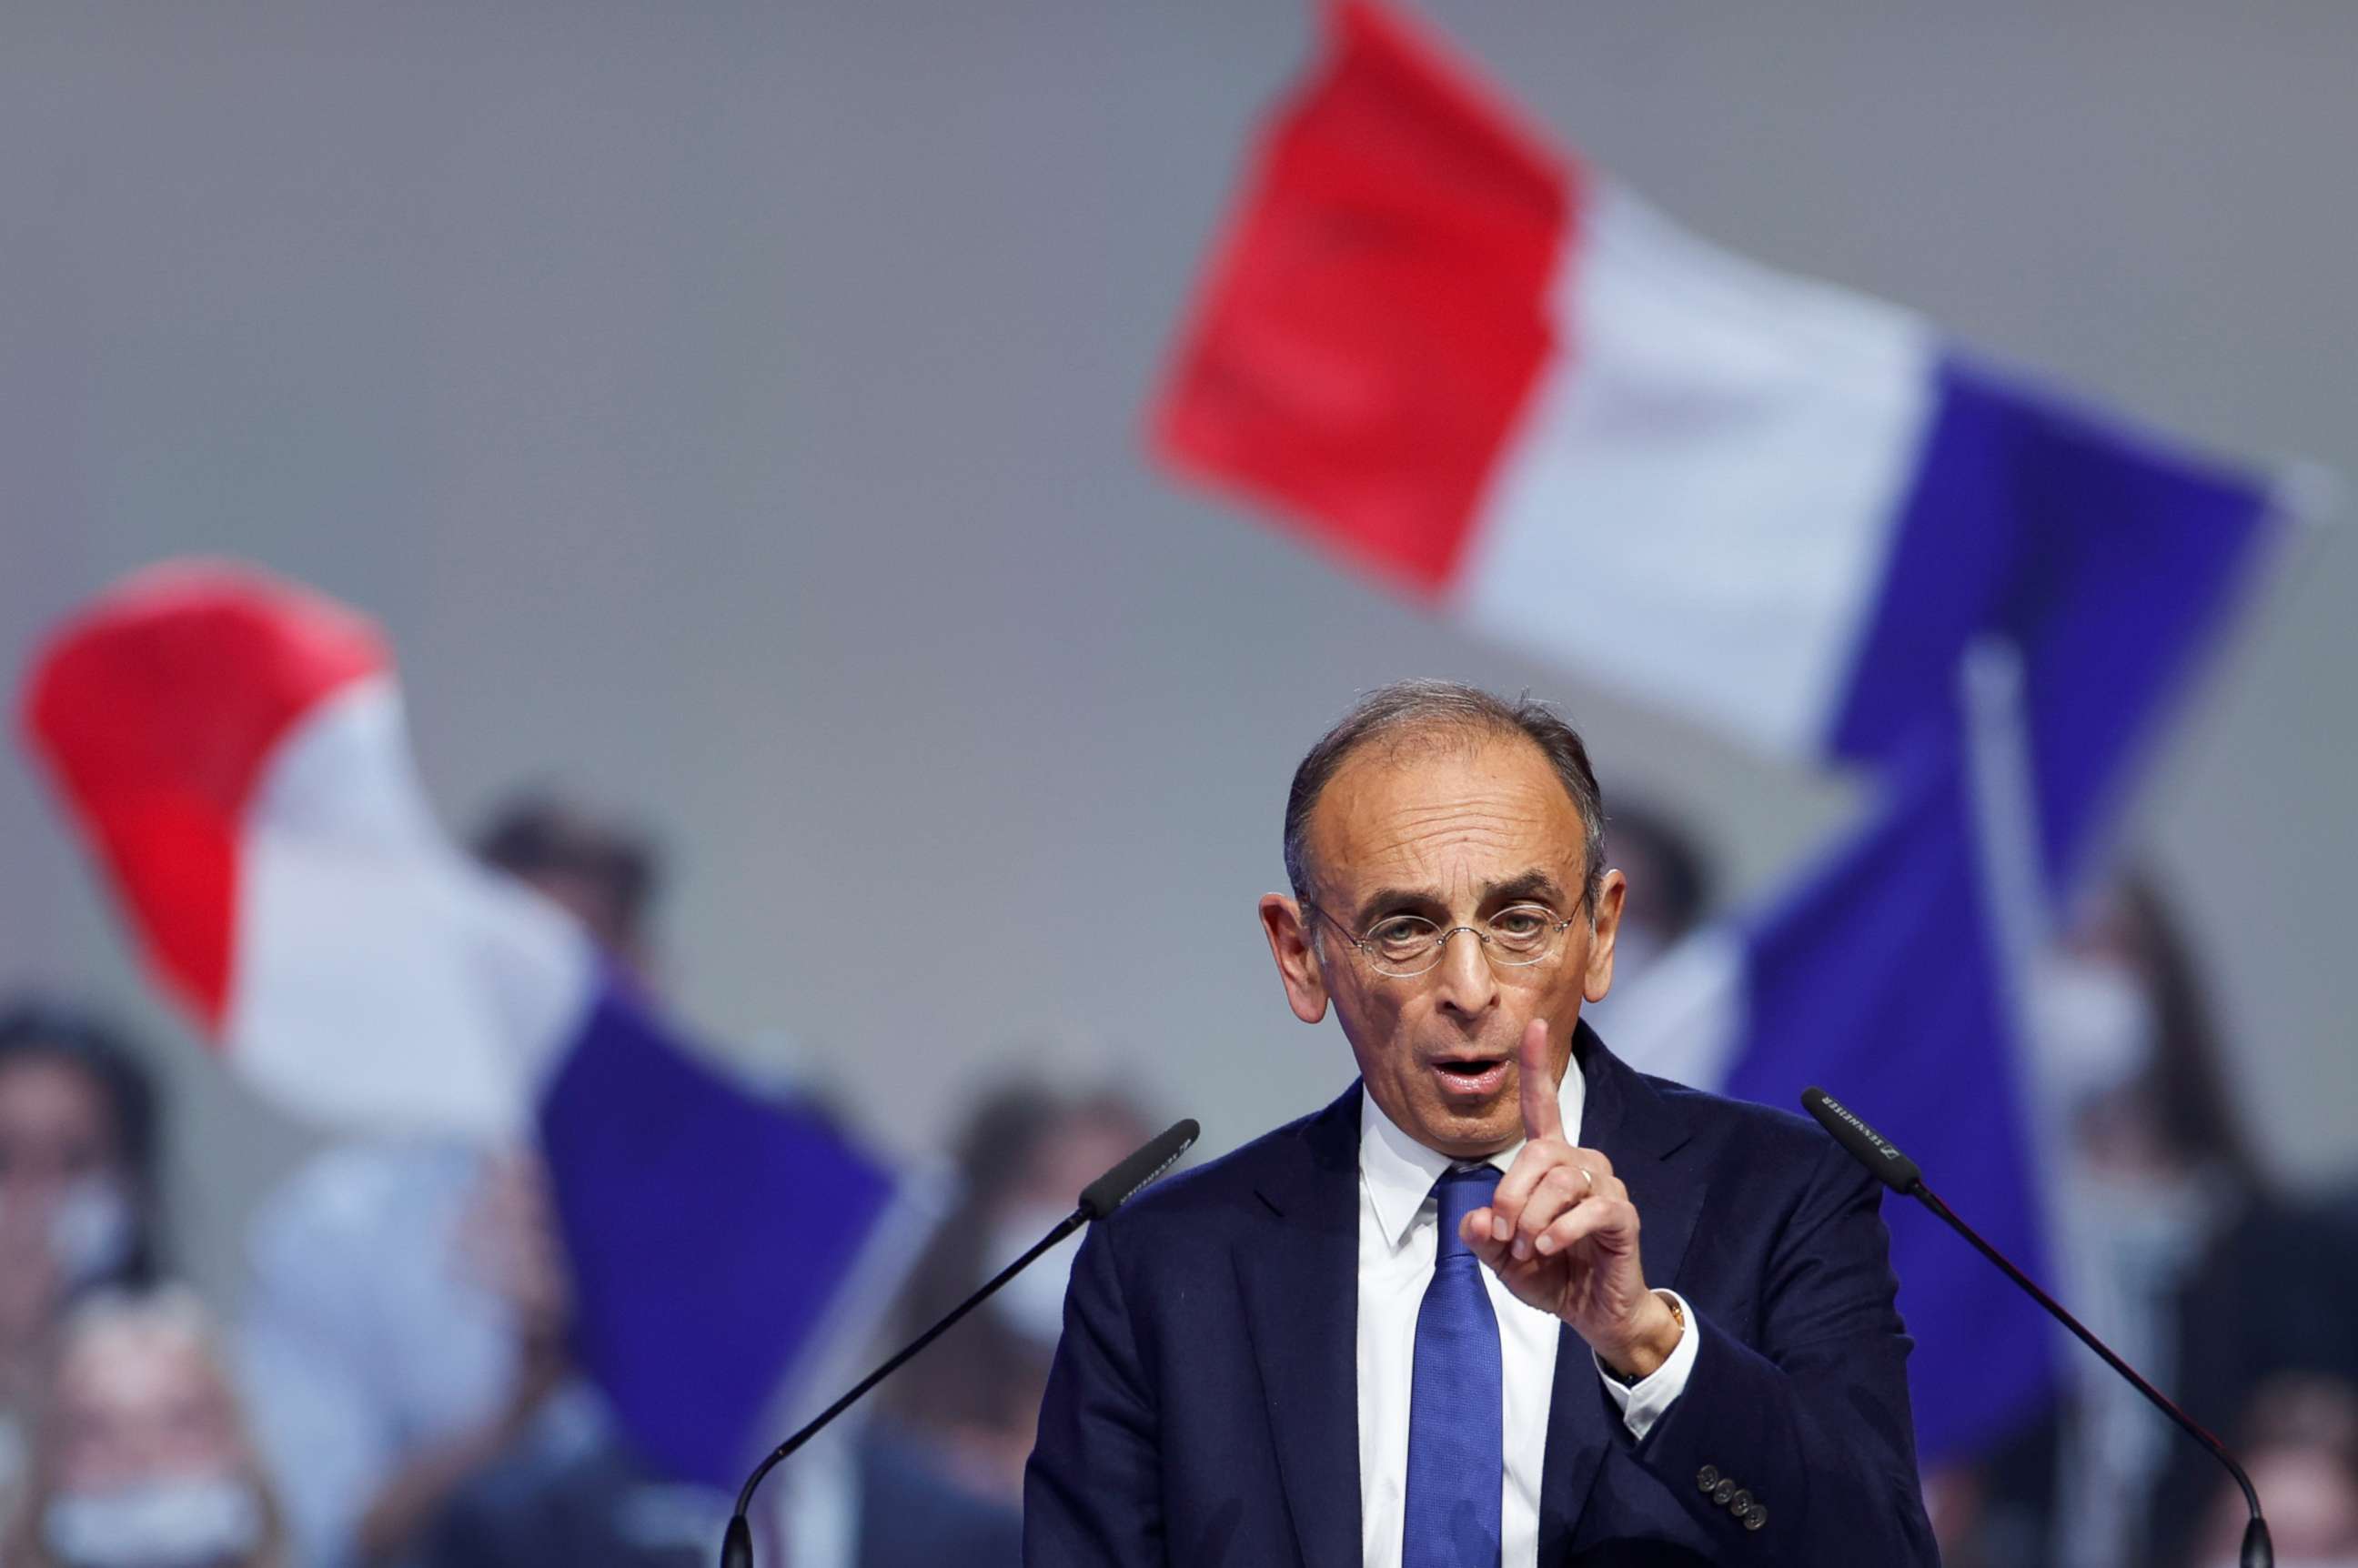 PHOTO: French far-right commentator Eric Zemmour, a candidate in the 2022 French presidential election, speaks during a political campaign rally in Villepinte near Paris, France, Dec. 5, 2021.